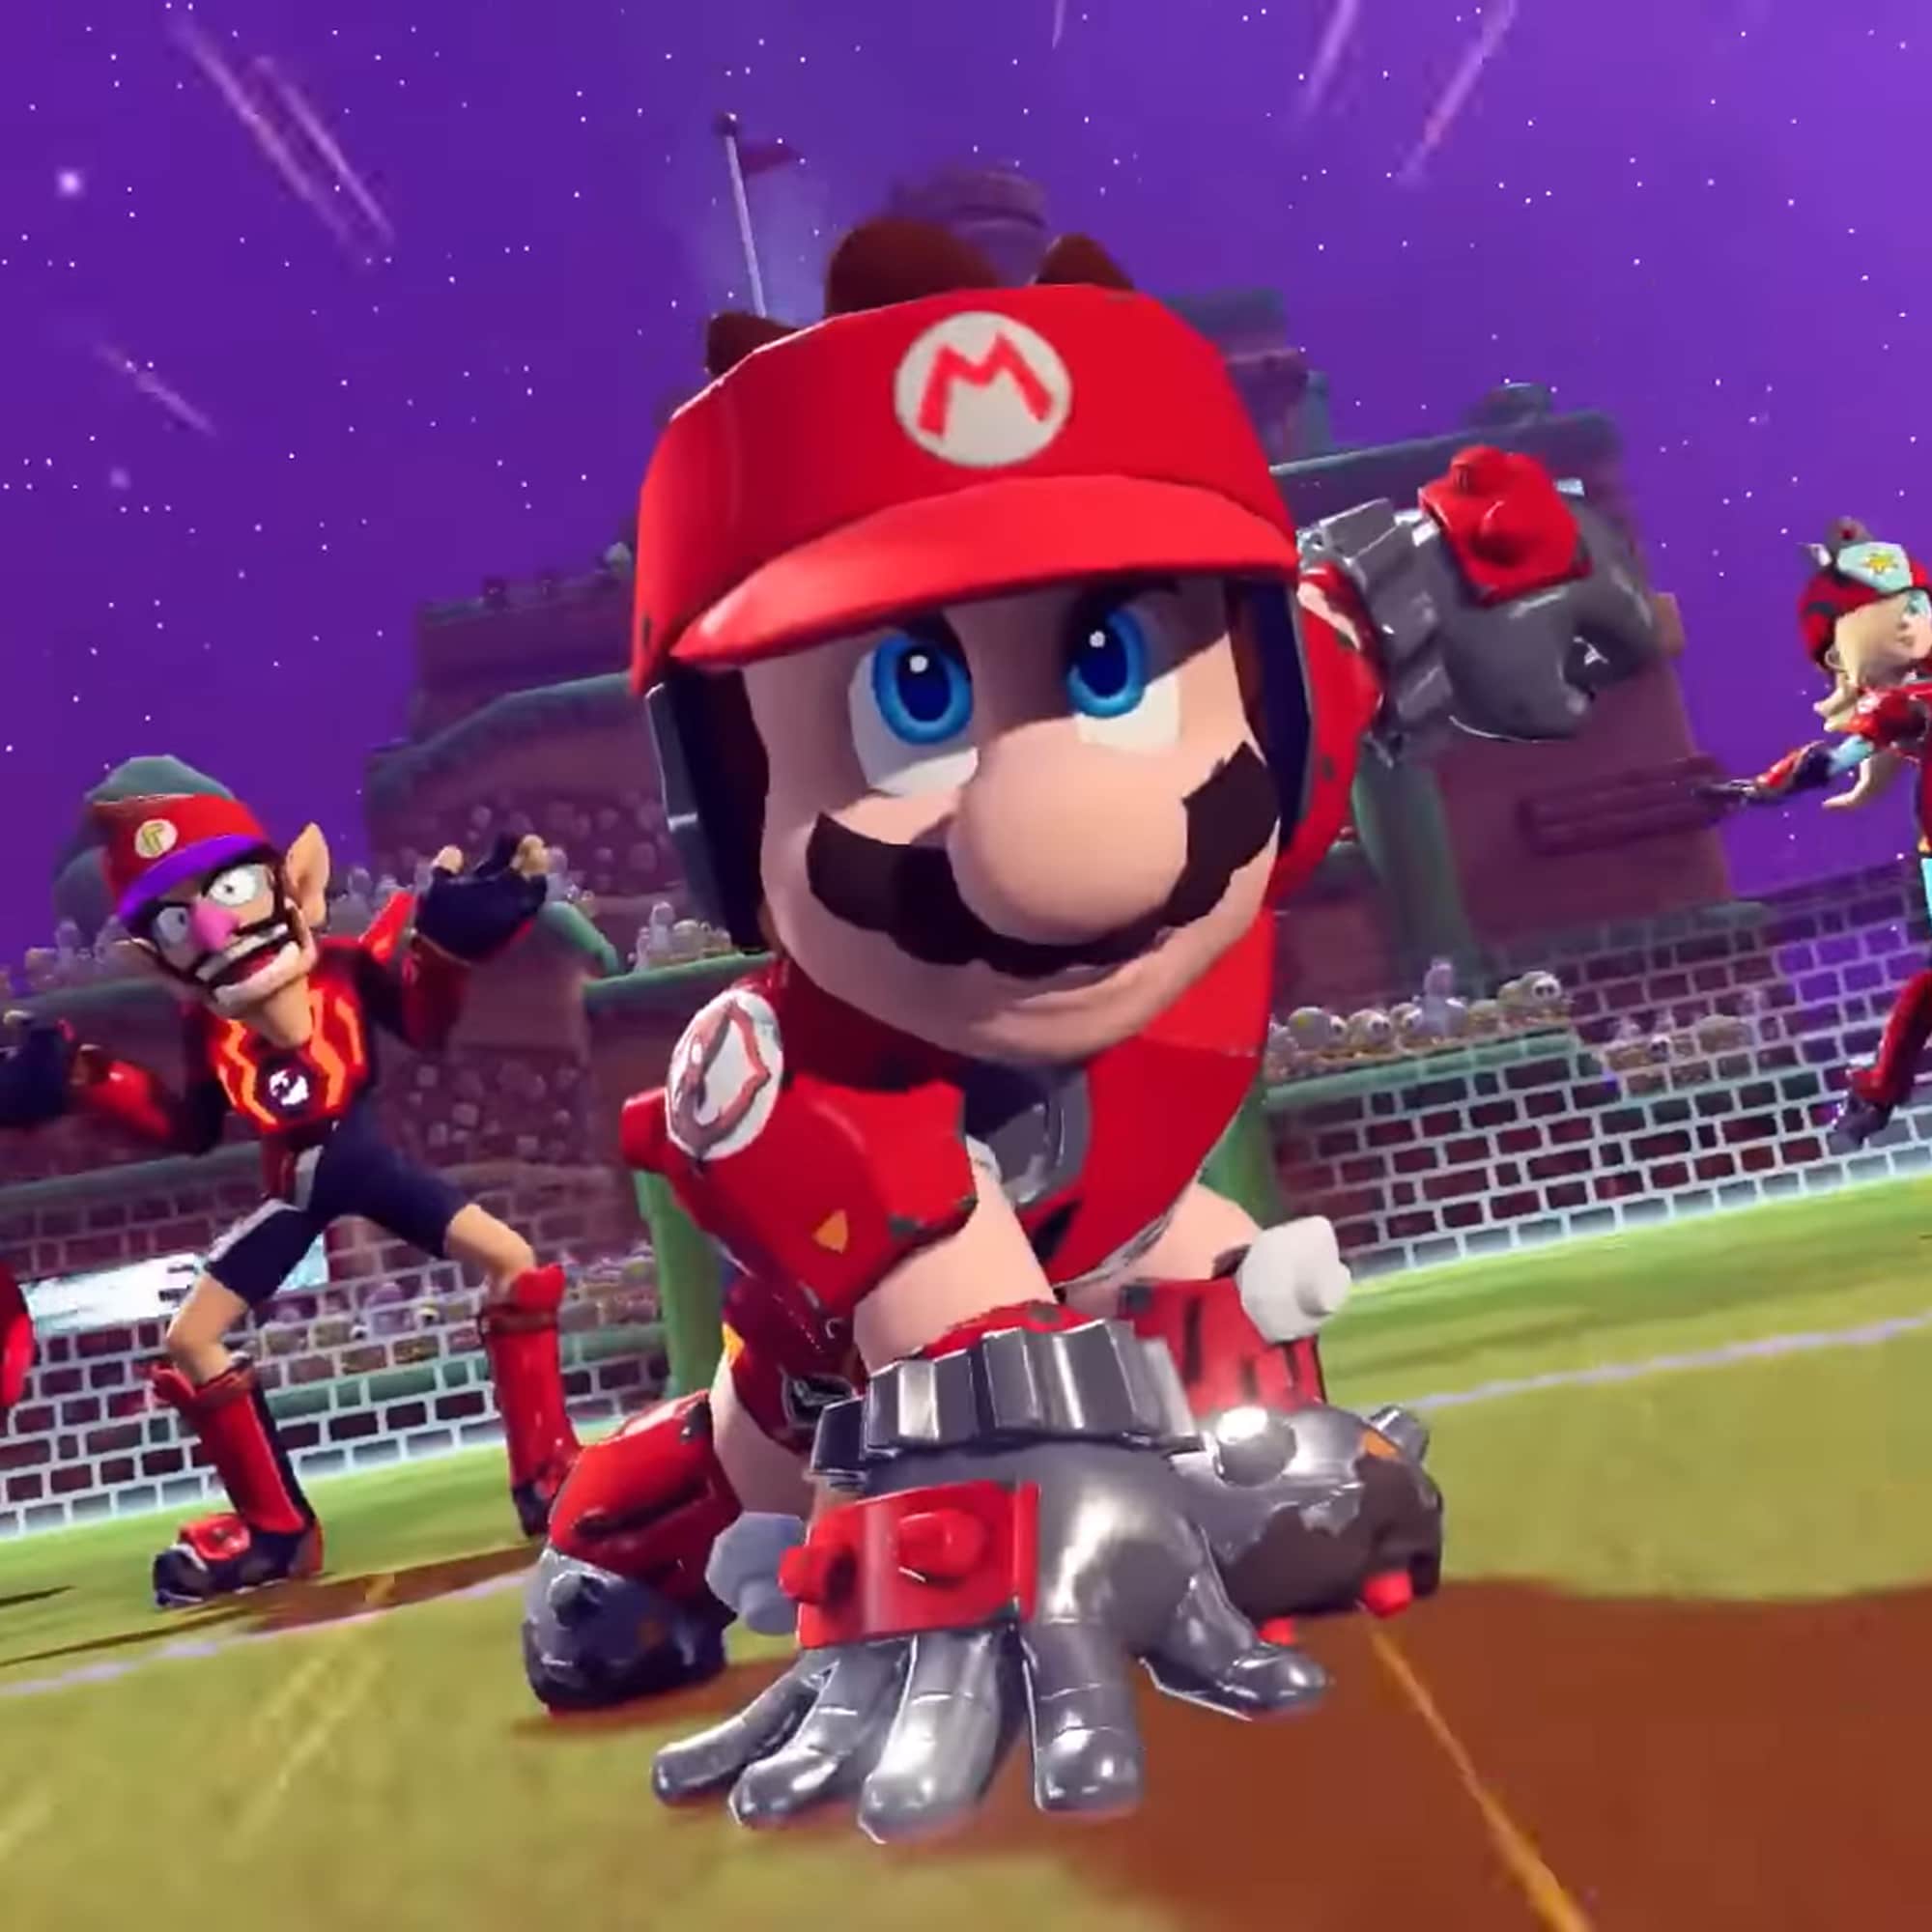 Mario in soccer gear at the start of a game in Mario Strikers: Battle League.